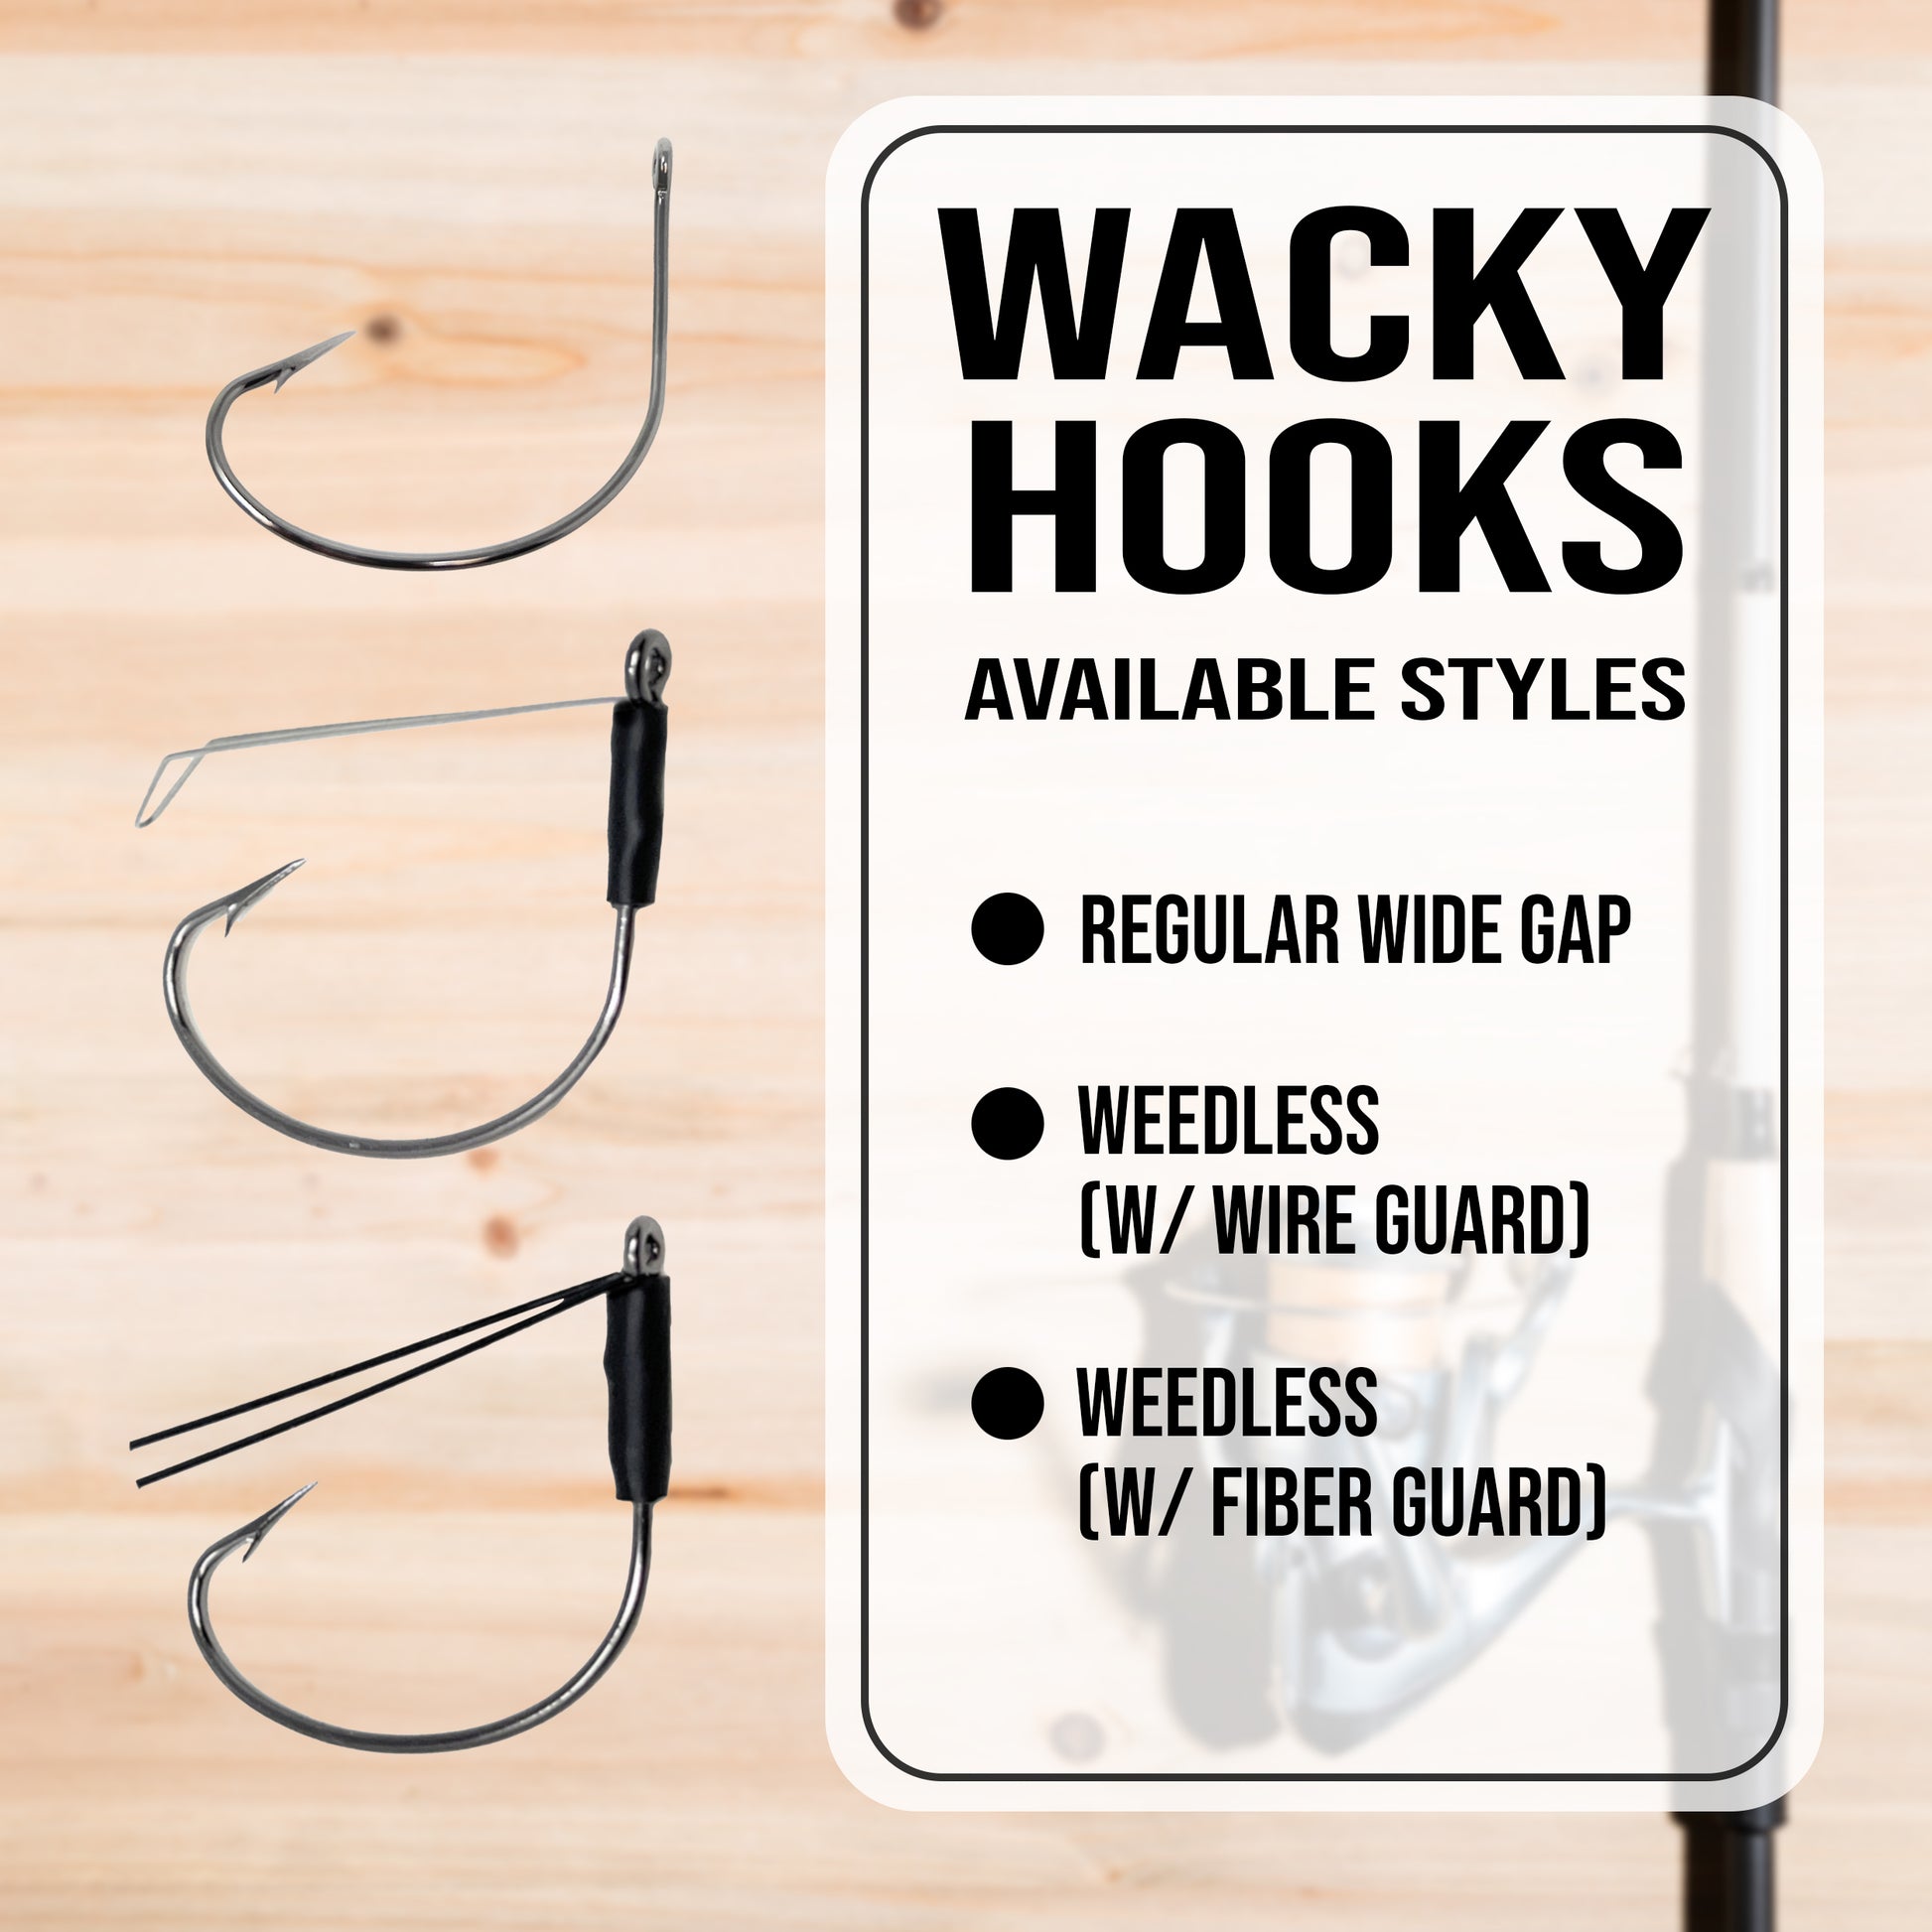 Texan hooks Owner 5139 Wide Gap - Nootica - Water addicts, like you!